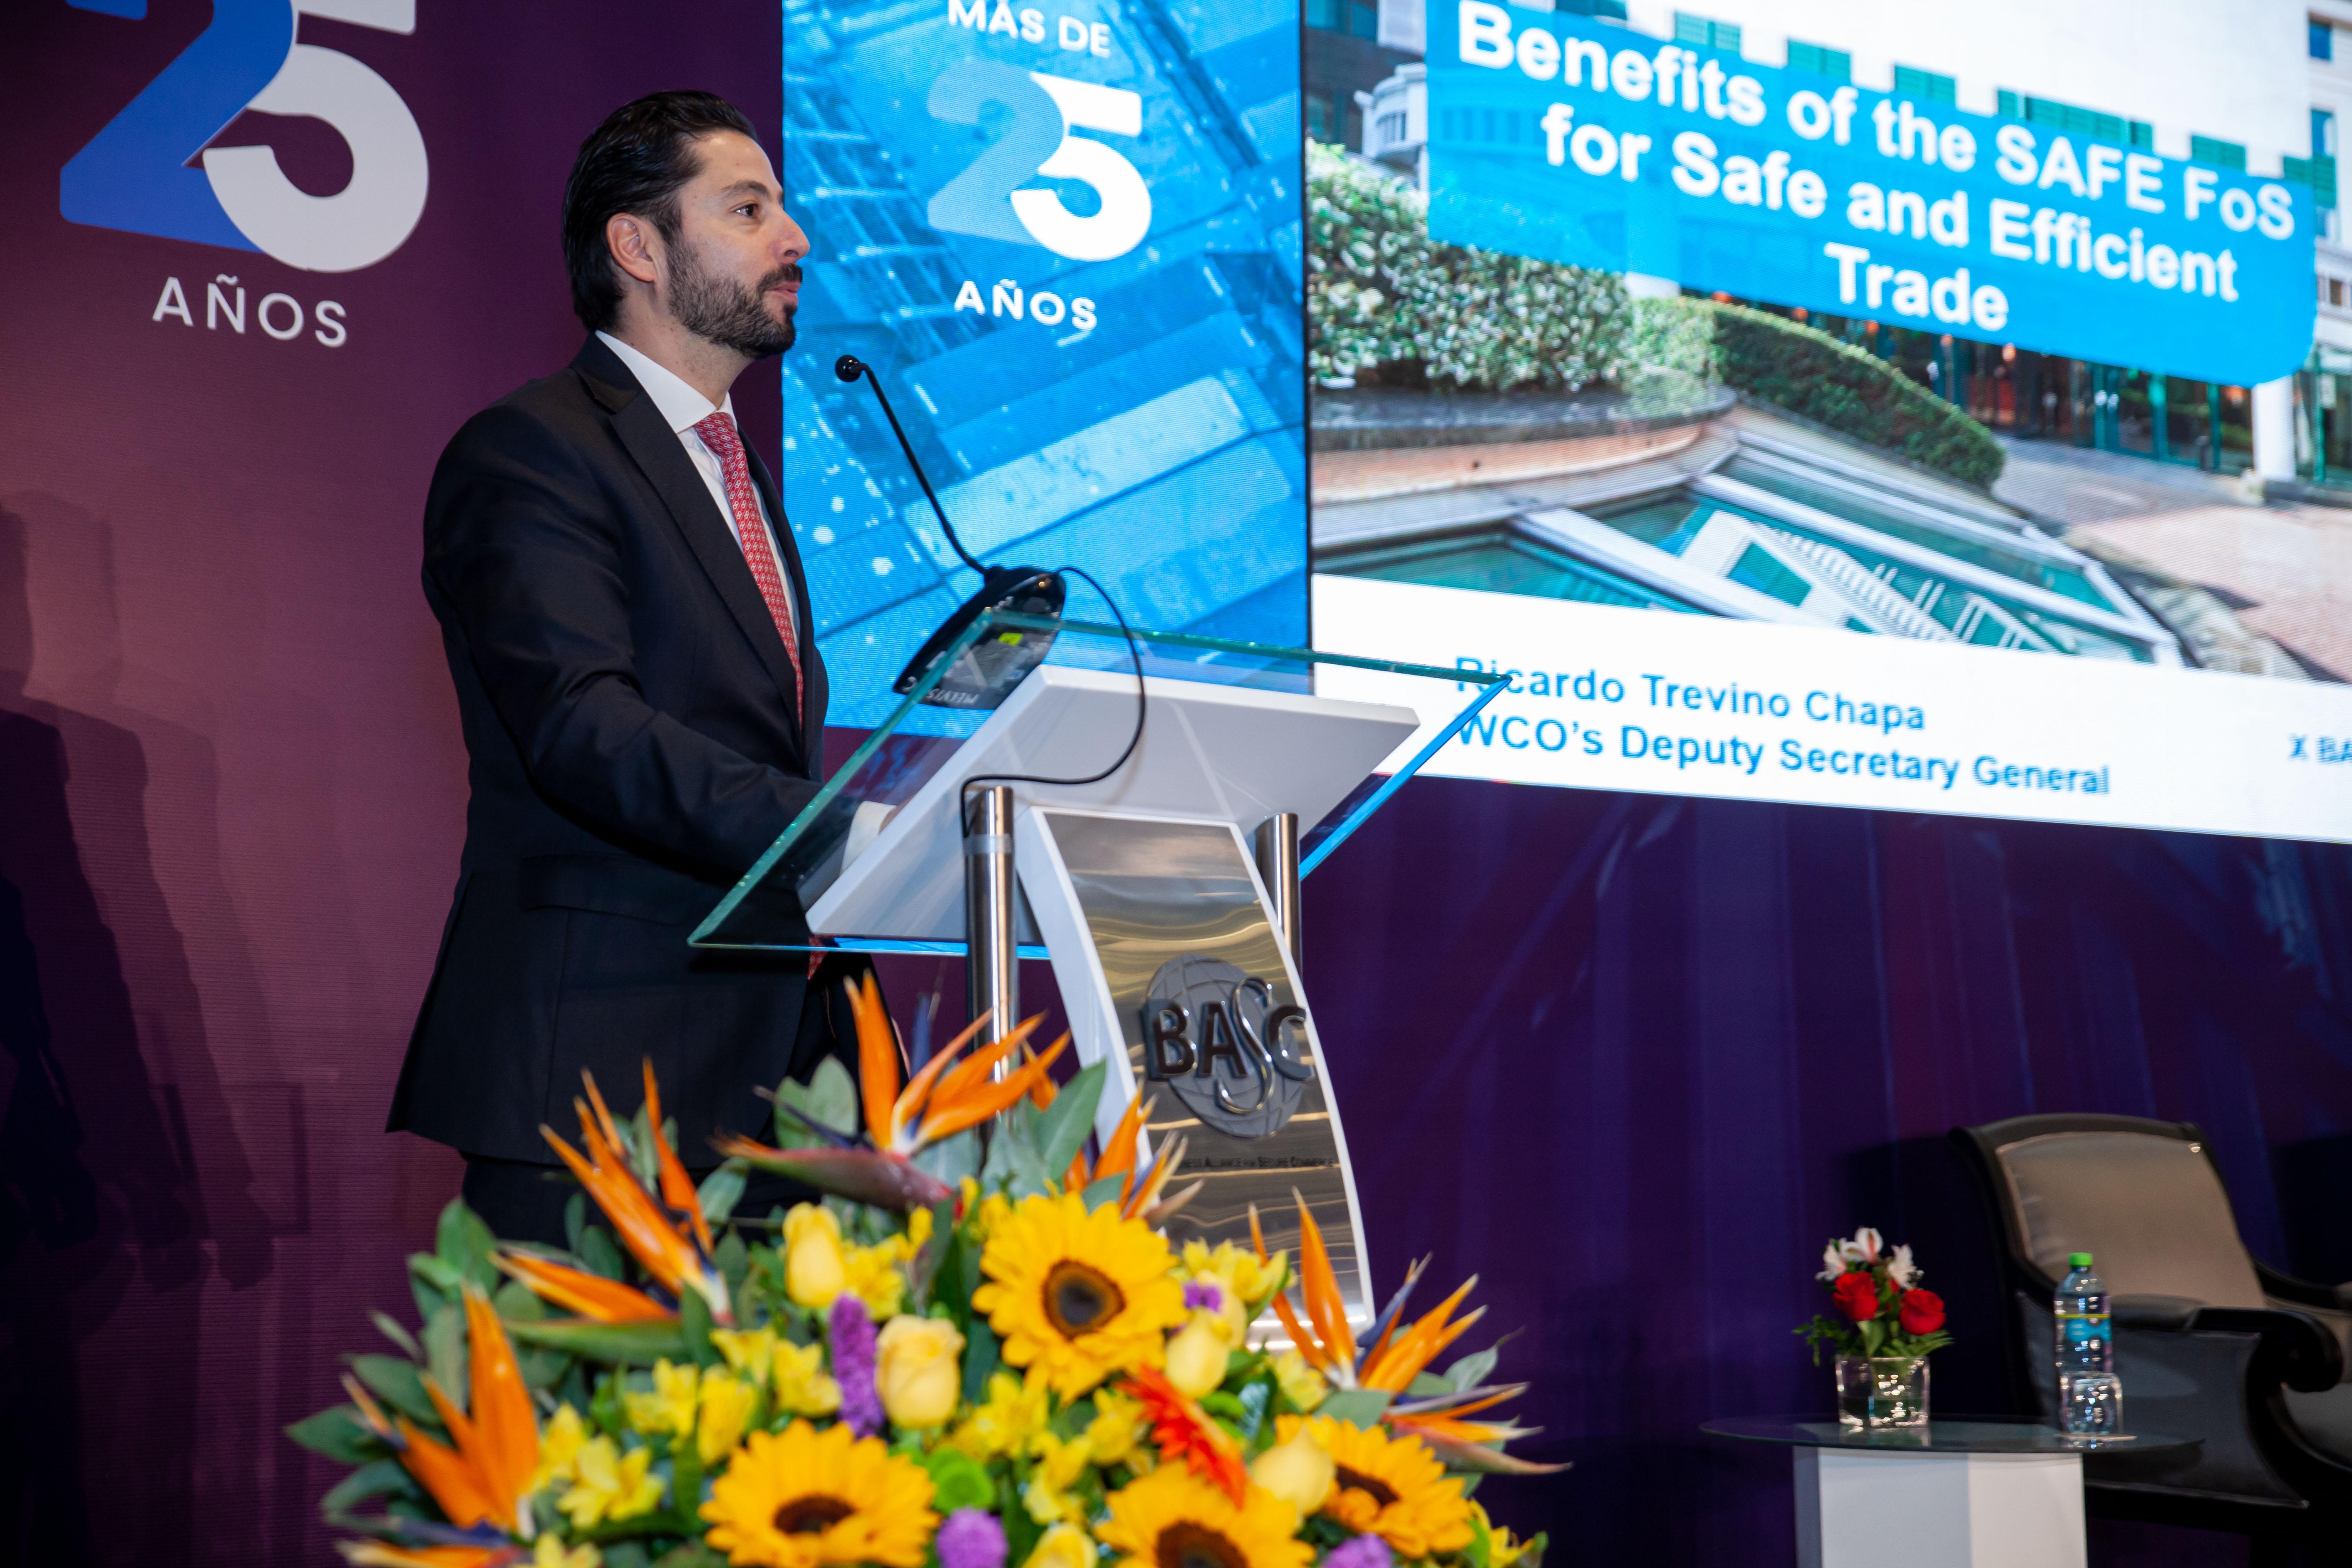 Deputy Secretary General of the World Customs Organization (WCO) participated in the 10th World Business Alliance for Secure Commerce (BASC) Congress held in Lima, Peru.